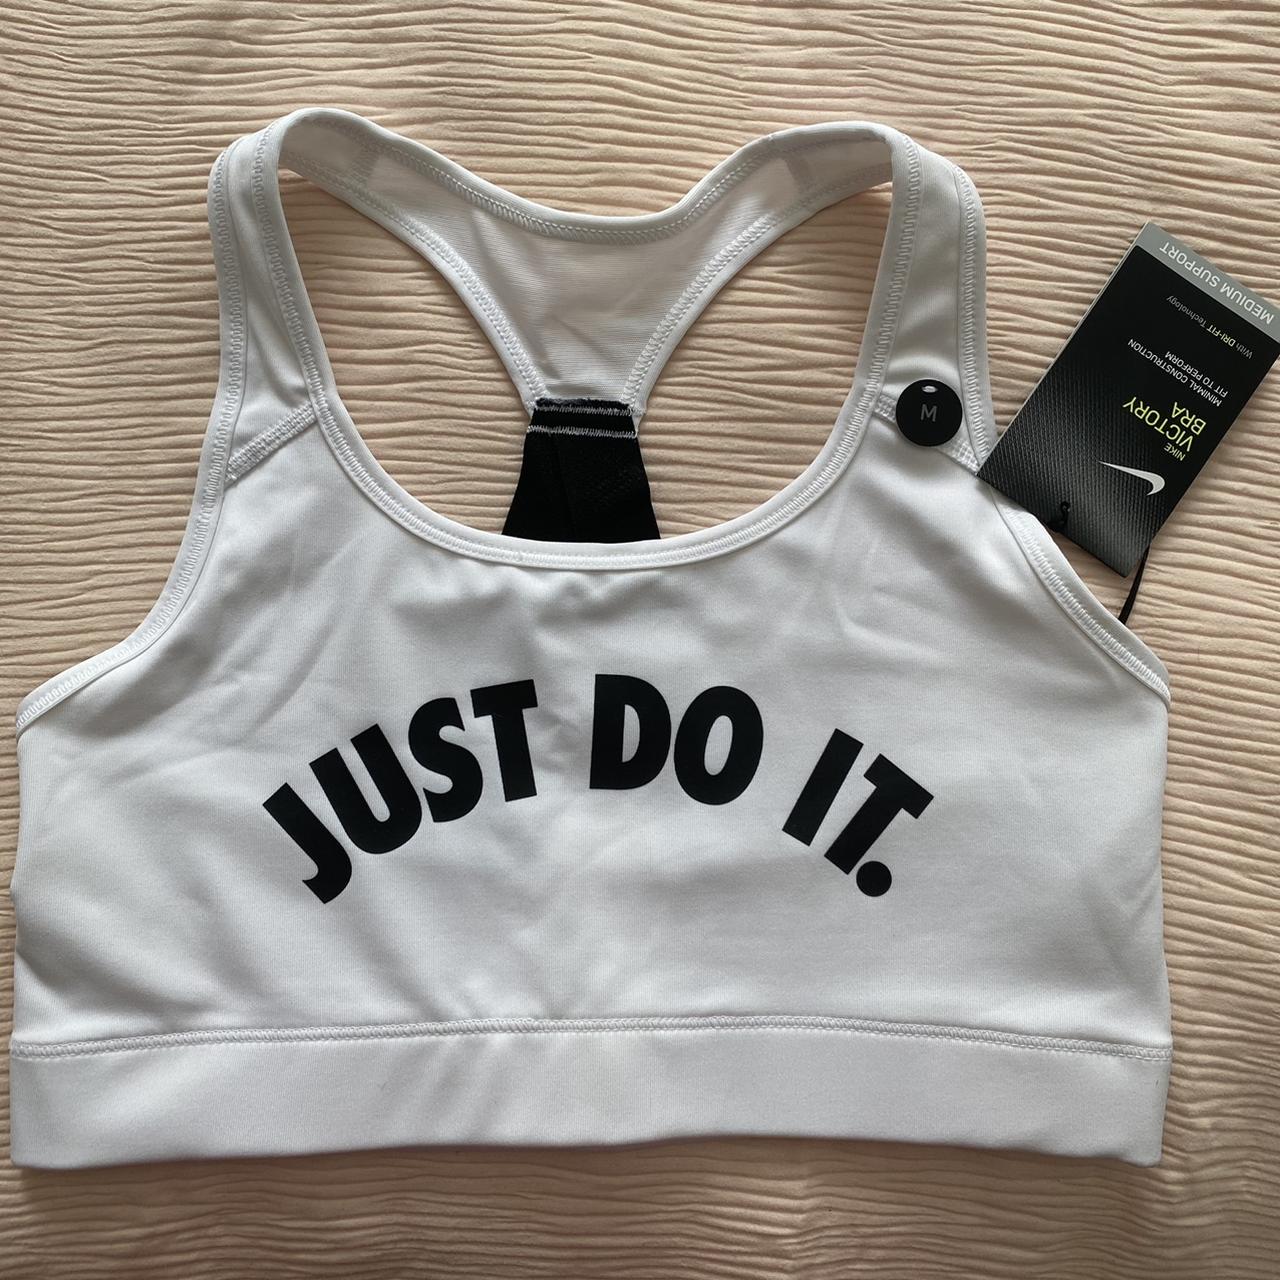 Nike Dri-Fit Sports Bra Women's White New with Tags